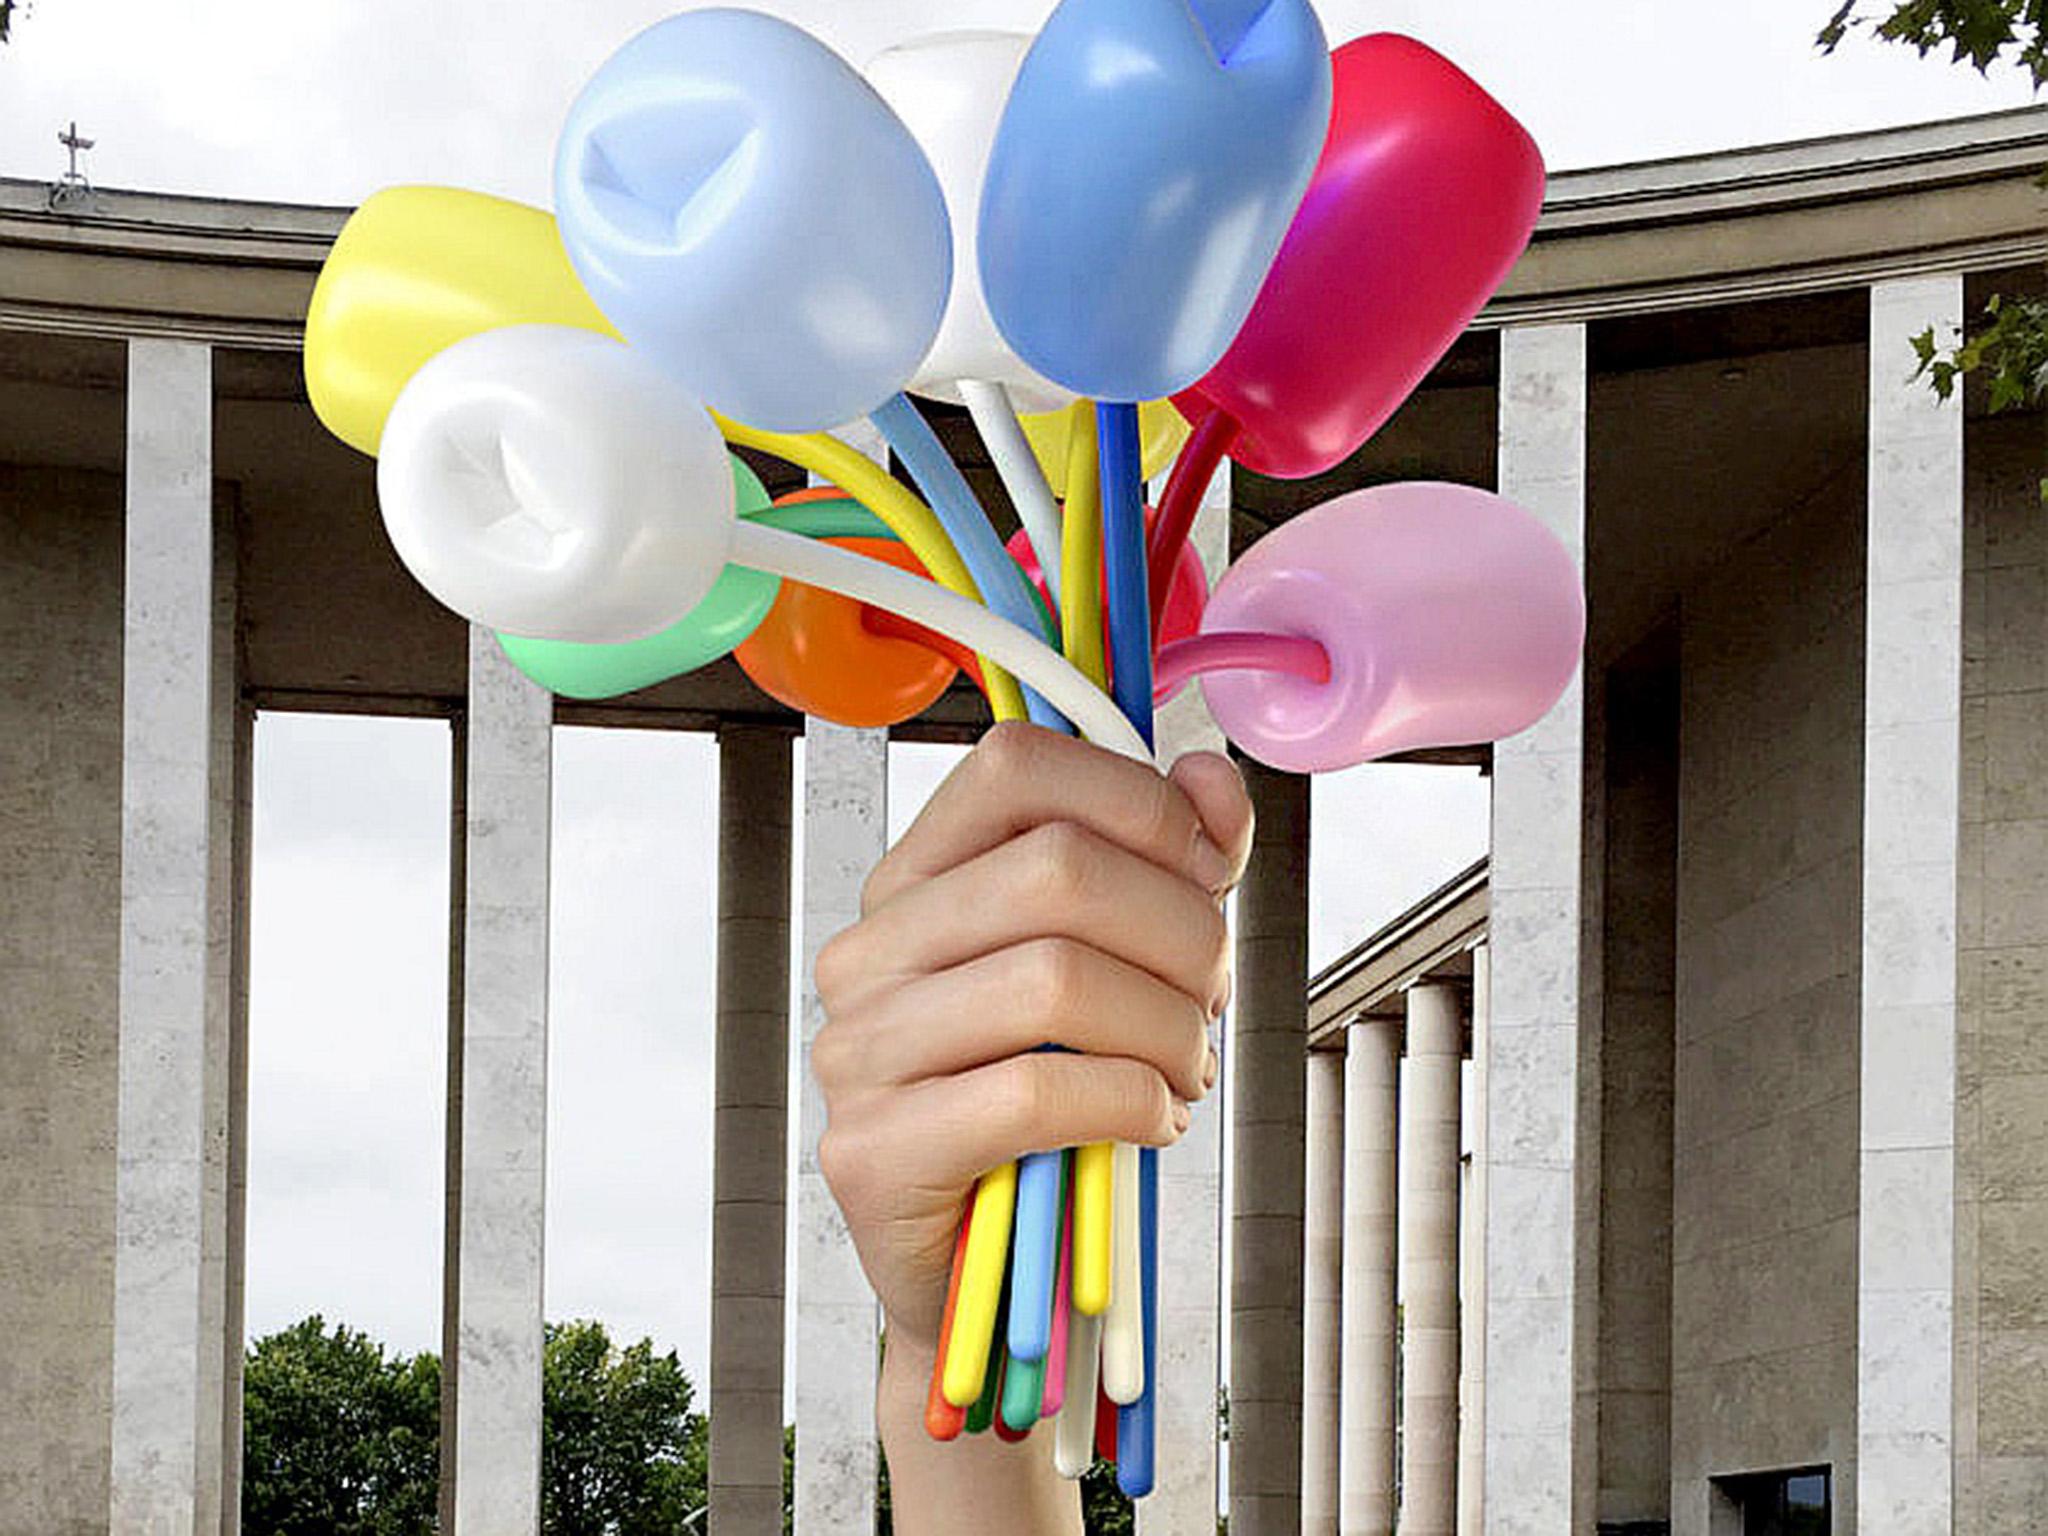 How Jeff Koons's gift to Paris is riddled with problems - The Independent